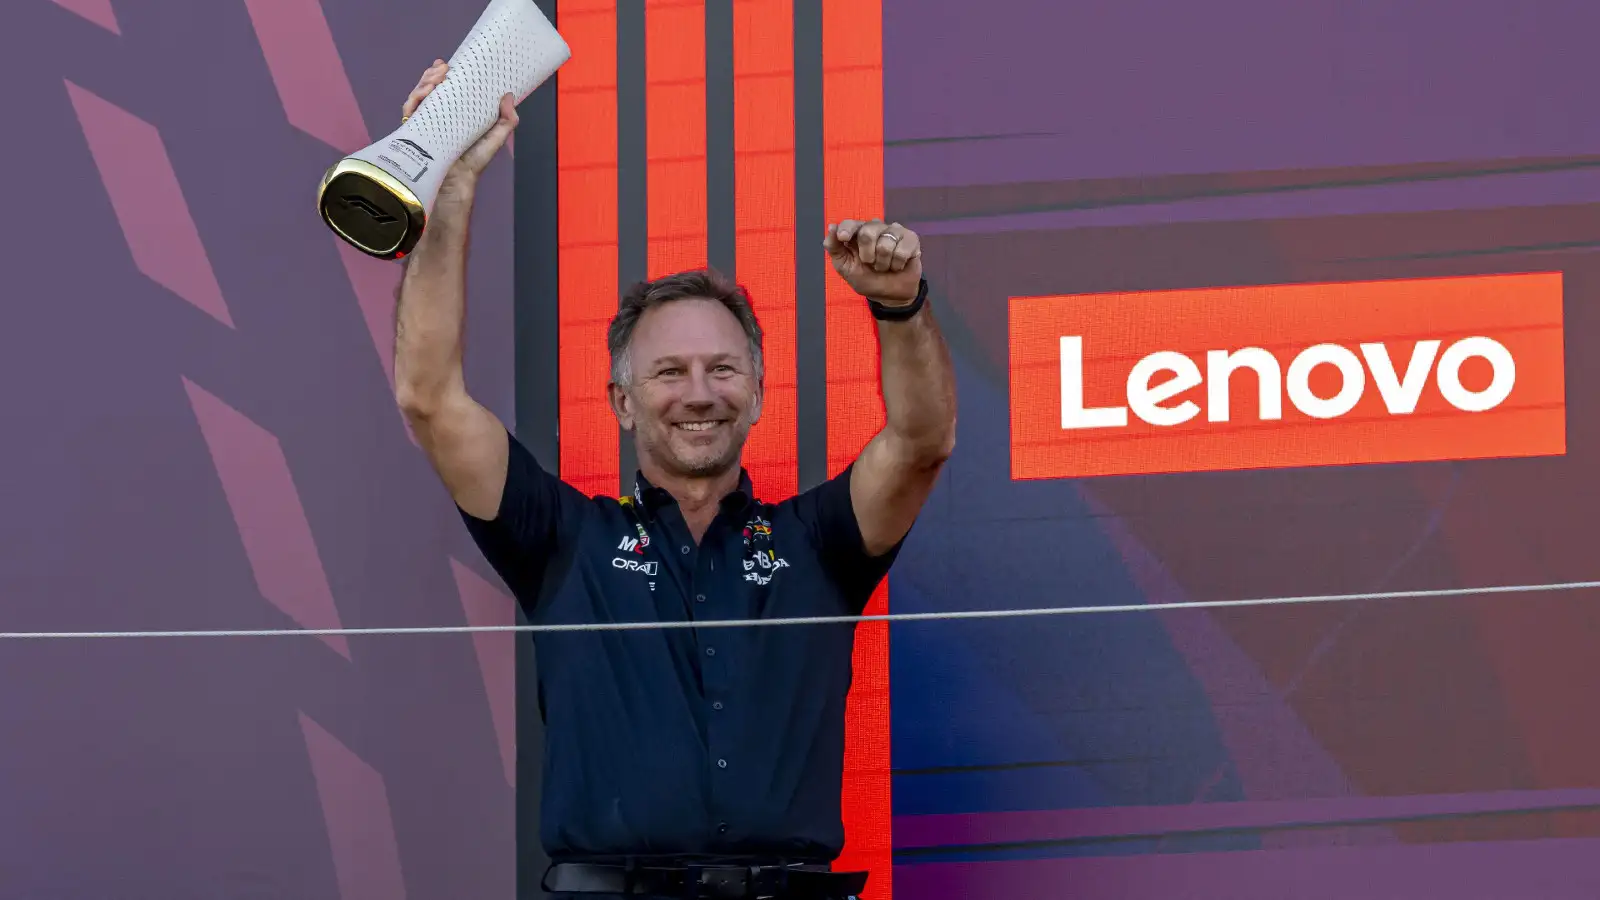 Christian Horner pictured on the podium at the Japanese Grand Prix.